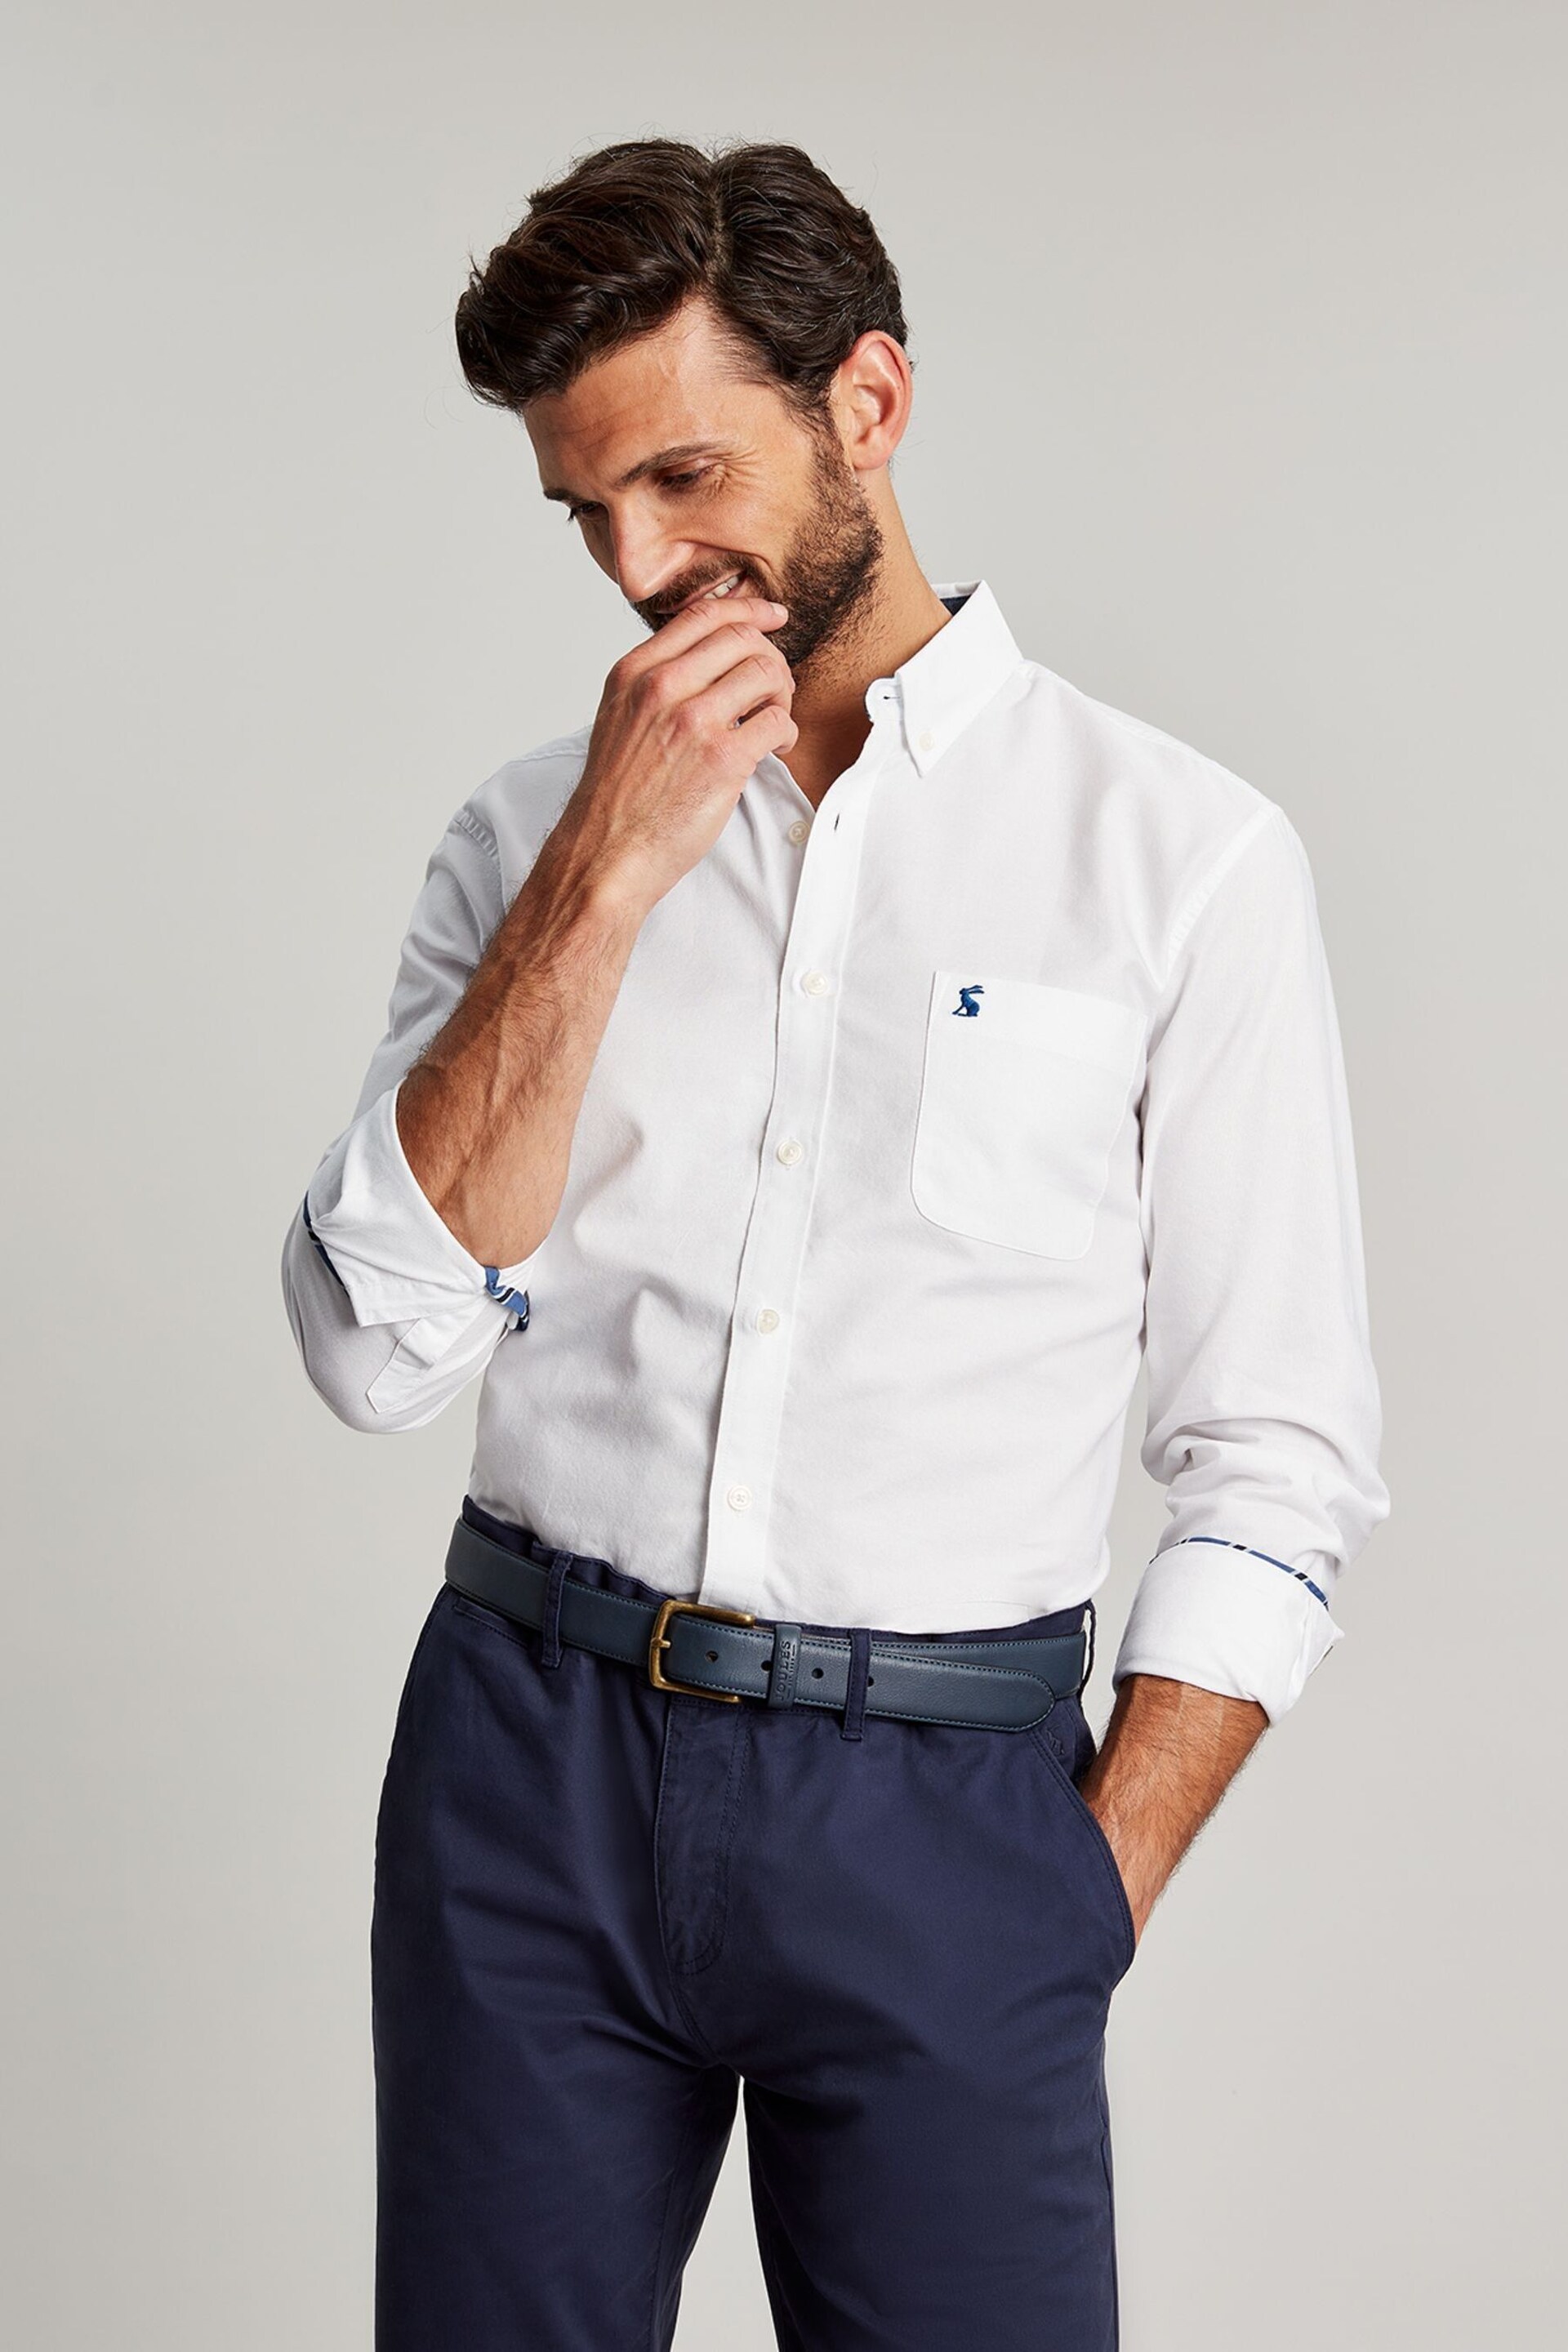 Joules White Classic Fit Cotton Oxford Shirt - Image 1 of 7